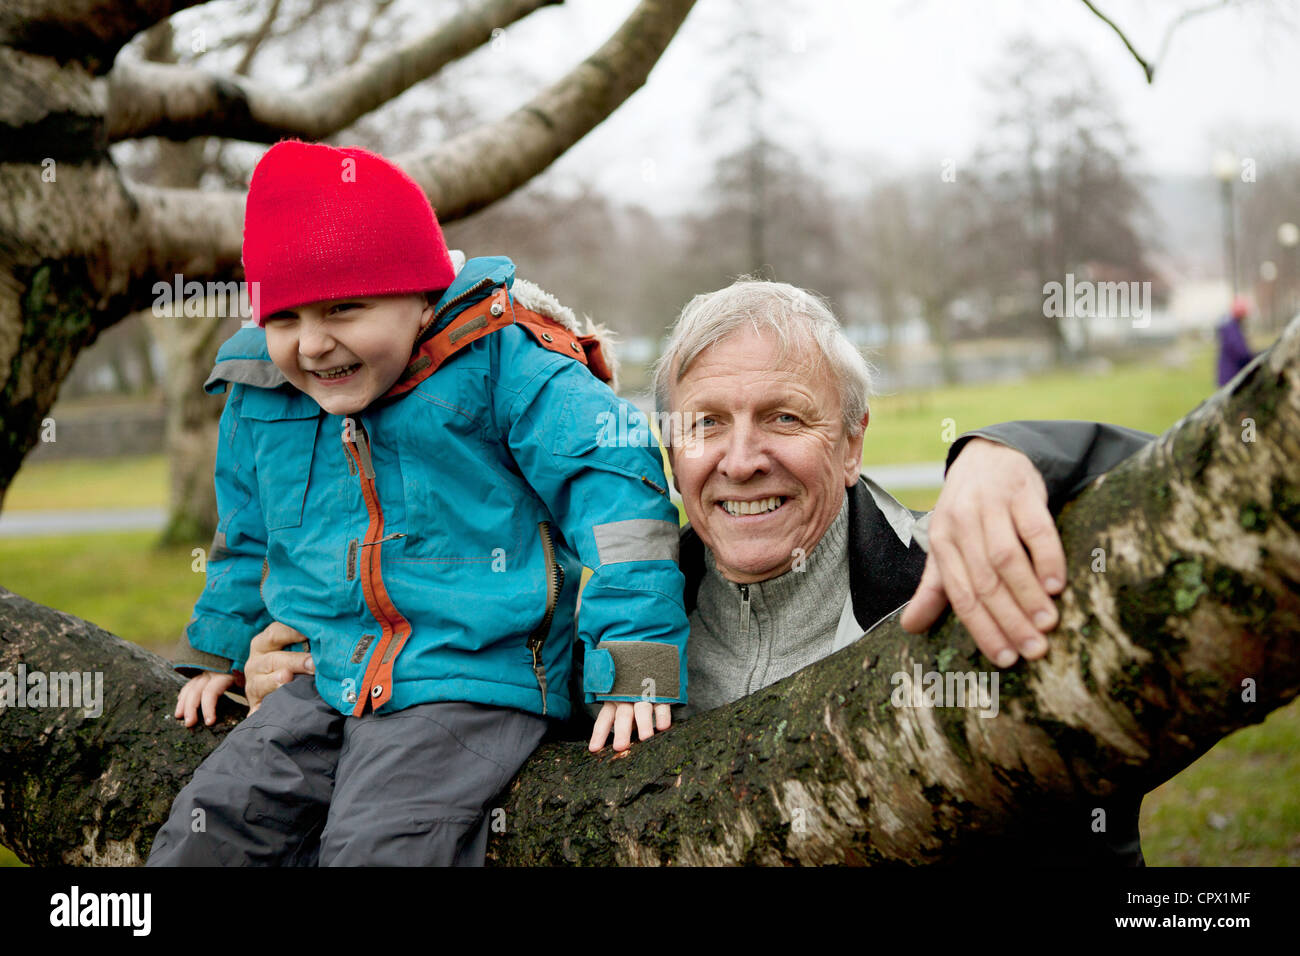 Granfather and boy sitting on tree branch, smiling Stock Photo